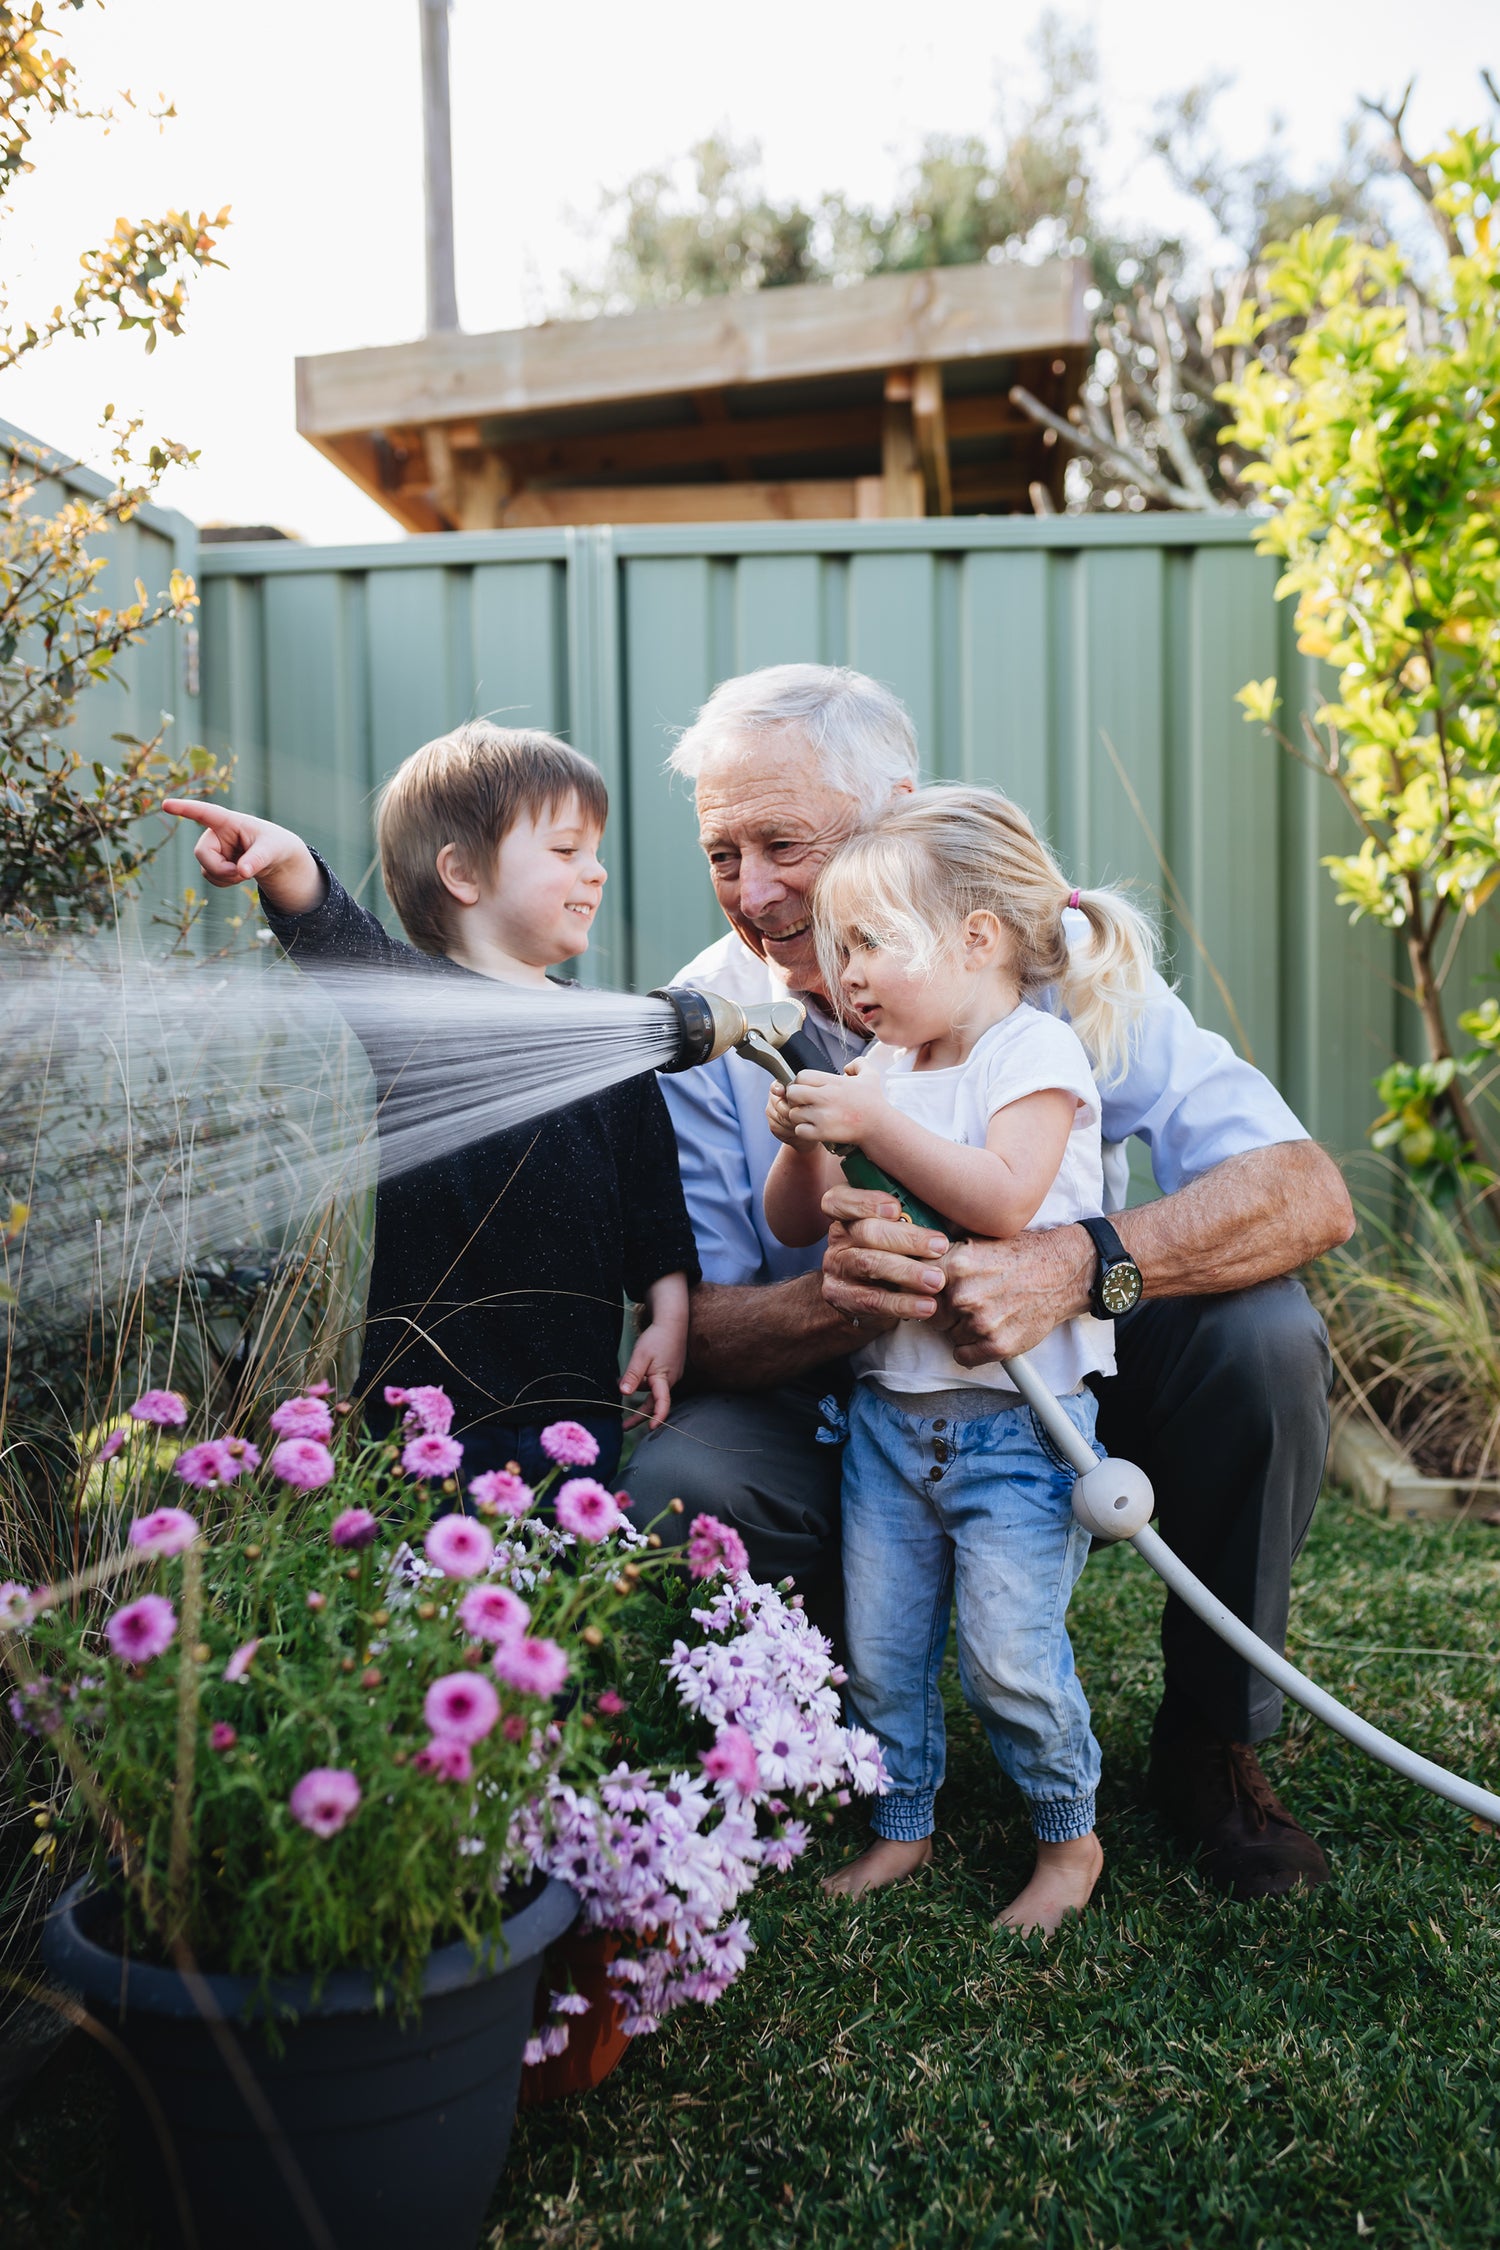 Granddad watering flowers in the garden with his grandson and grand daughter